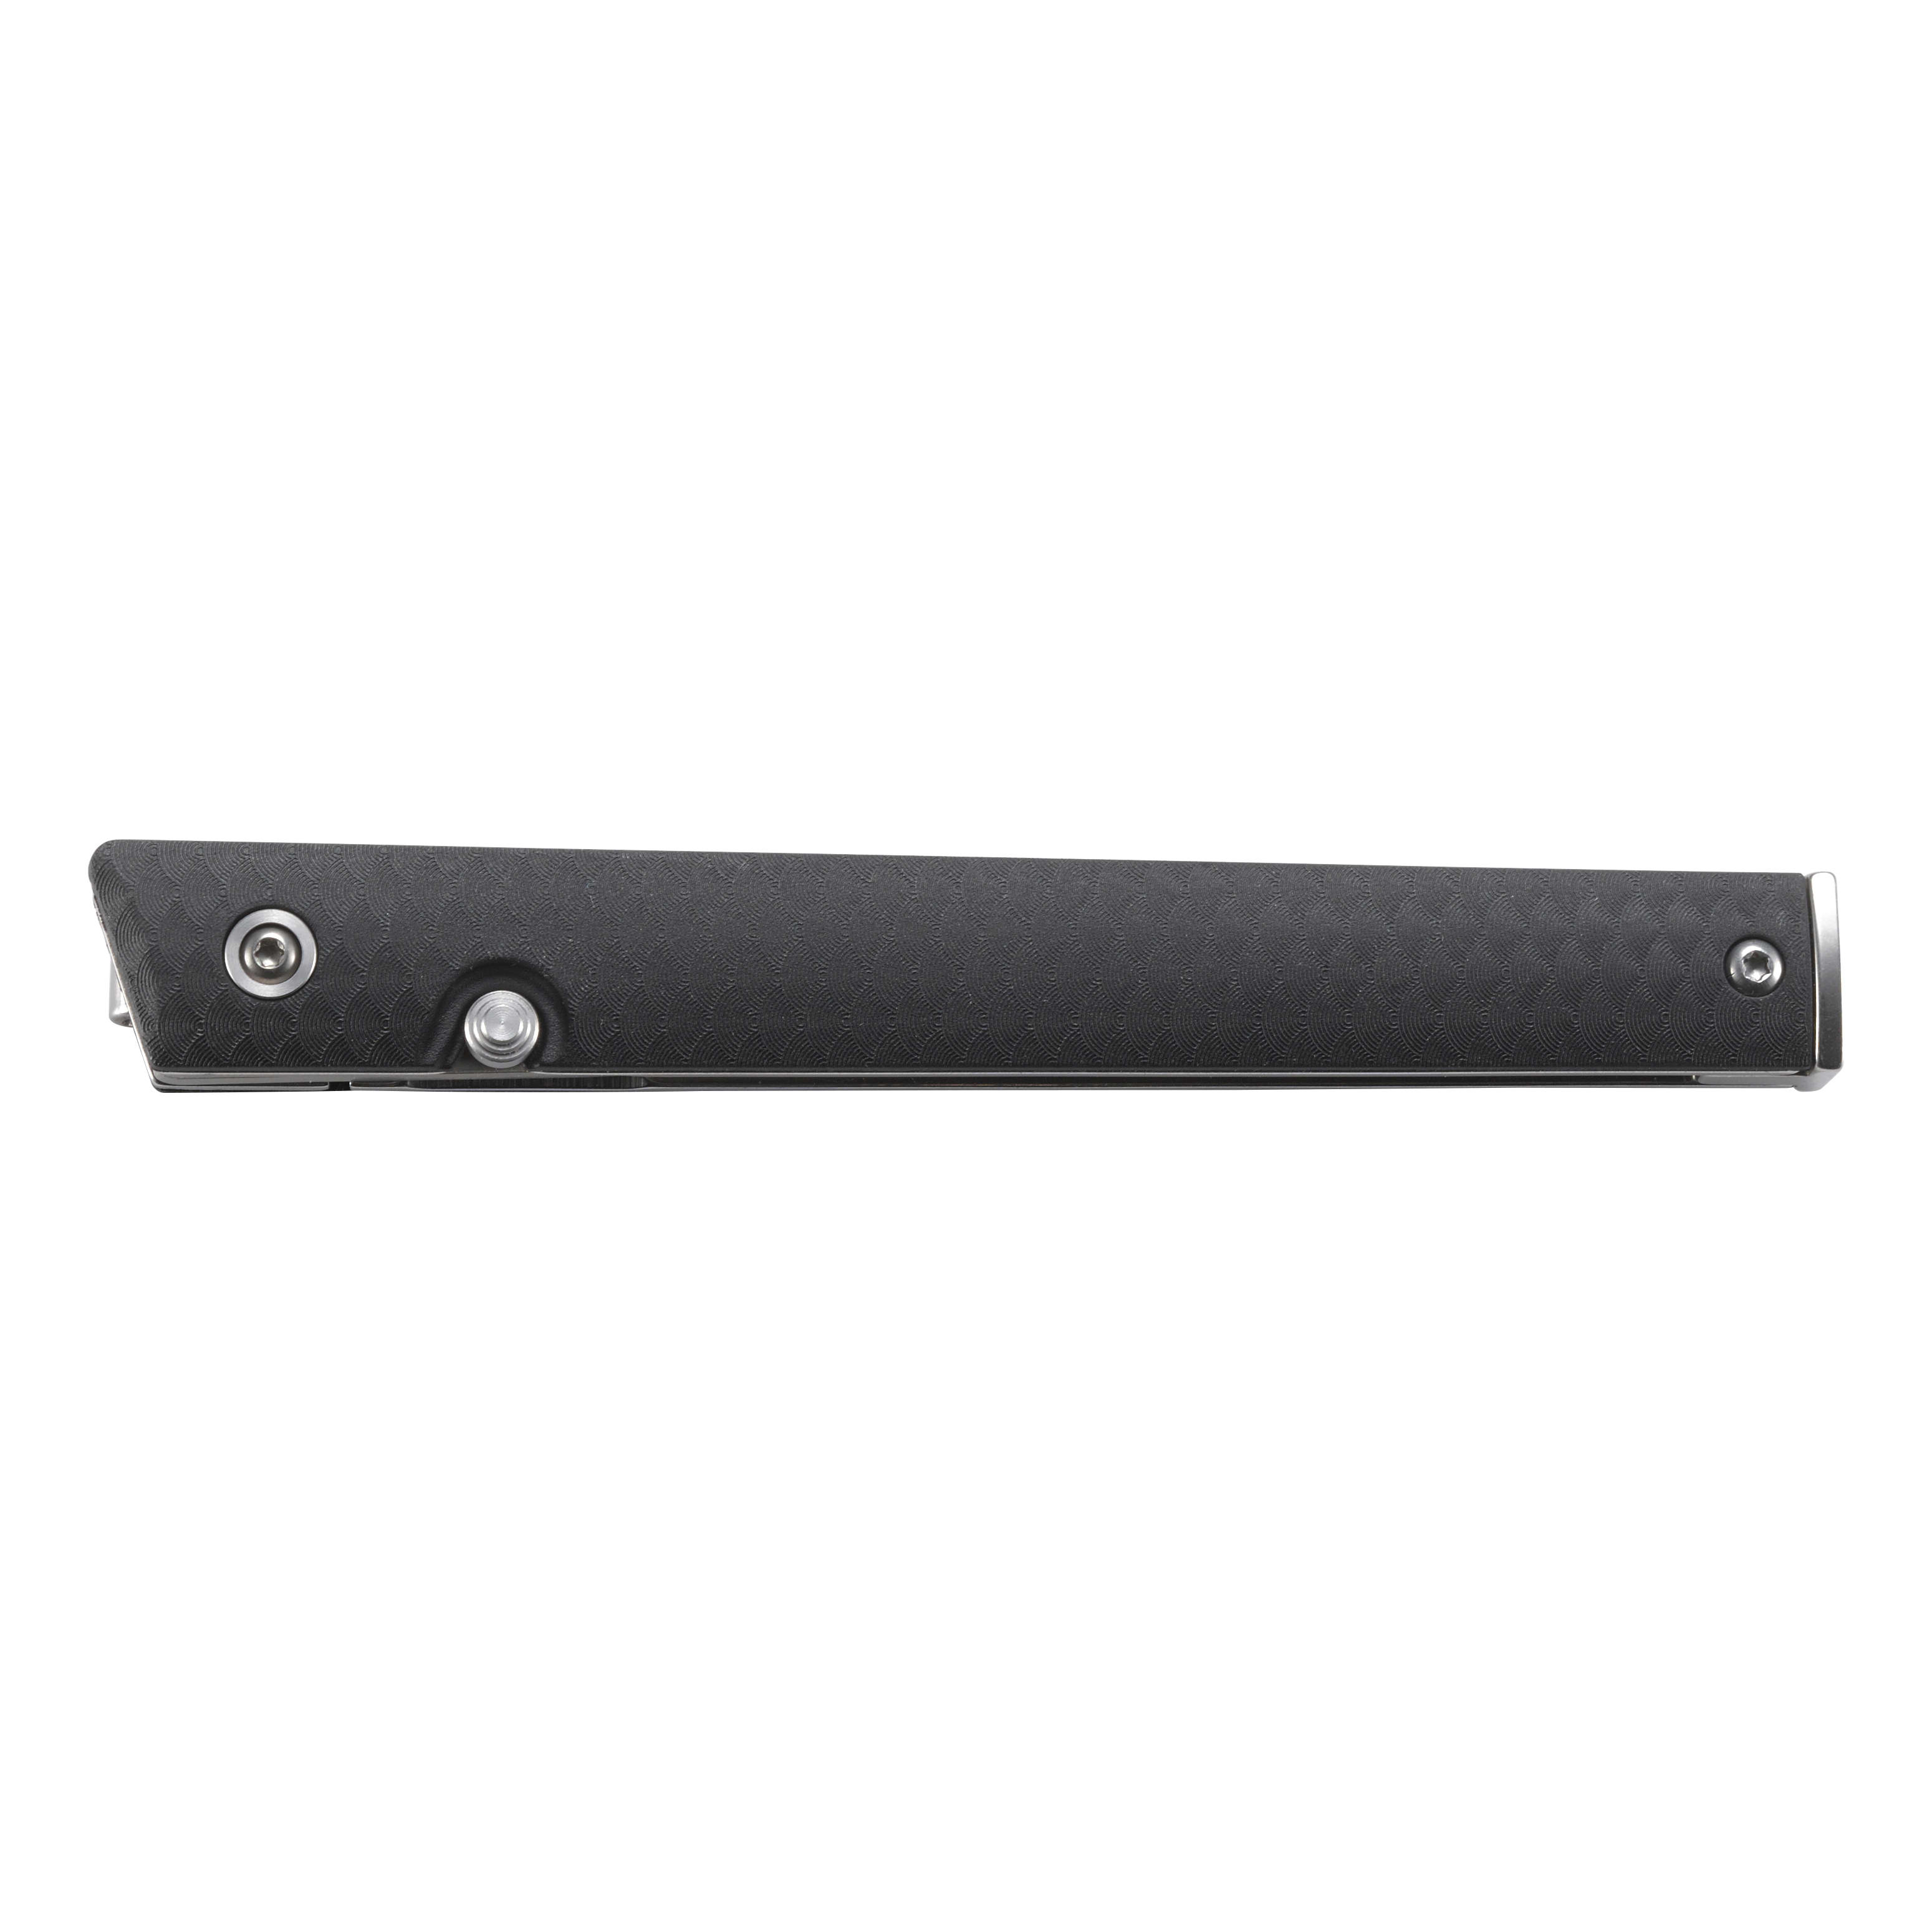 CRKT® CEO Folding Knife - Closed View